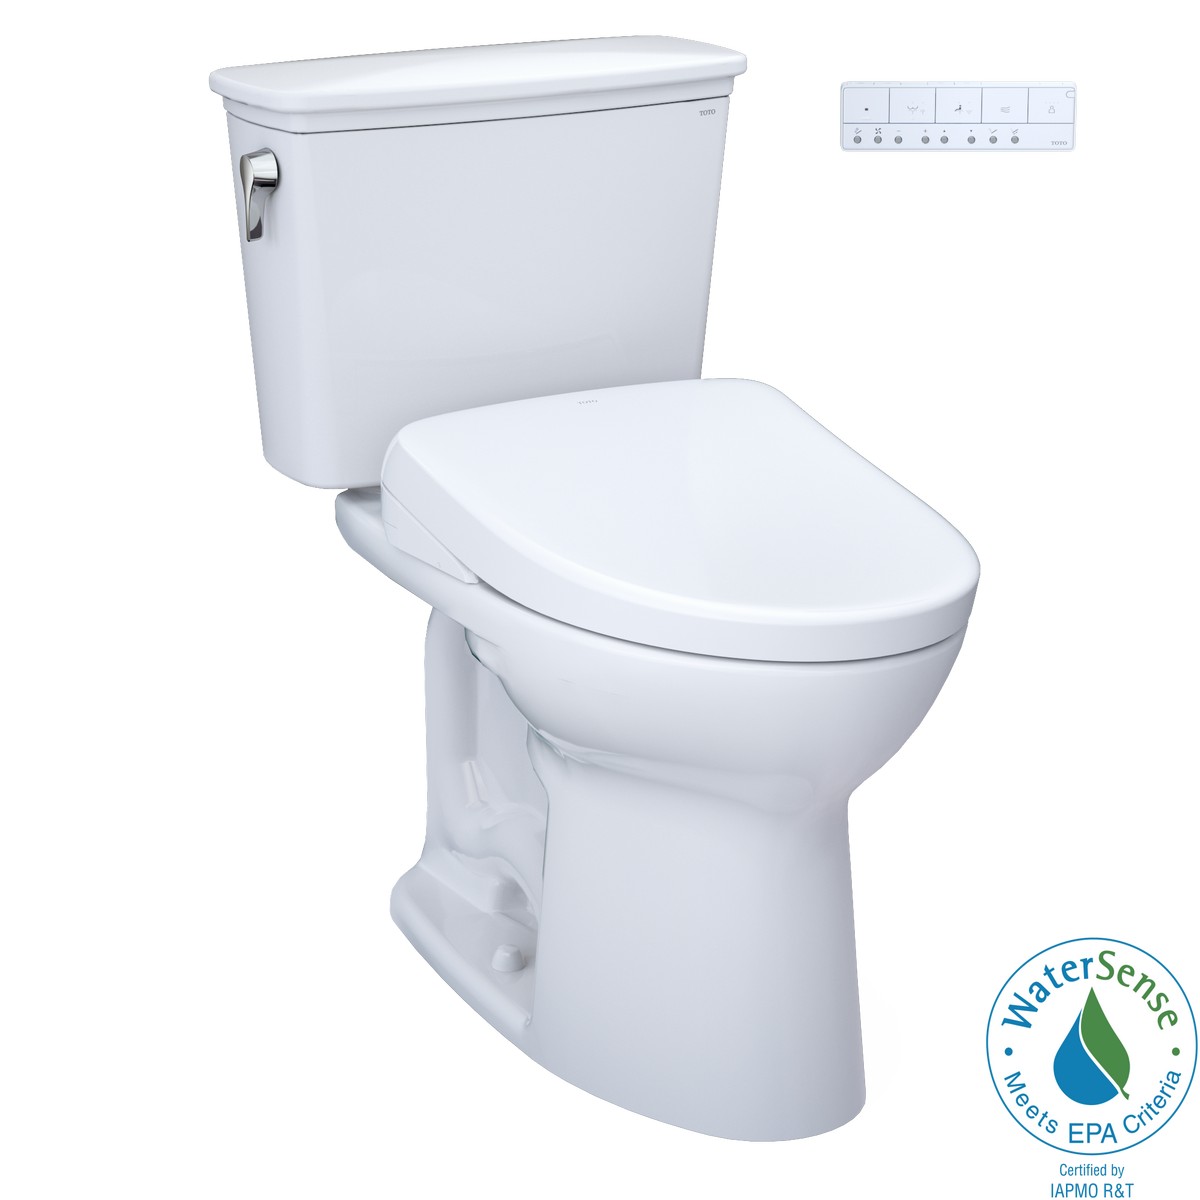 TOTO MW7864736CEF.10#01 DRAKE TRANSITIONAL WASHLET+ 1.28 GPF TWO PIECE 10 INCH ROUGH-IN ELONGATED UNIVERSAL HEIGHT TORNADO FLUSH TOILET WITH WASHLET S7A BIDET SEAT IN COTTON WHITE